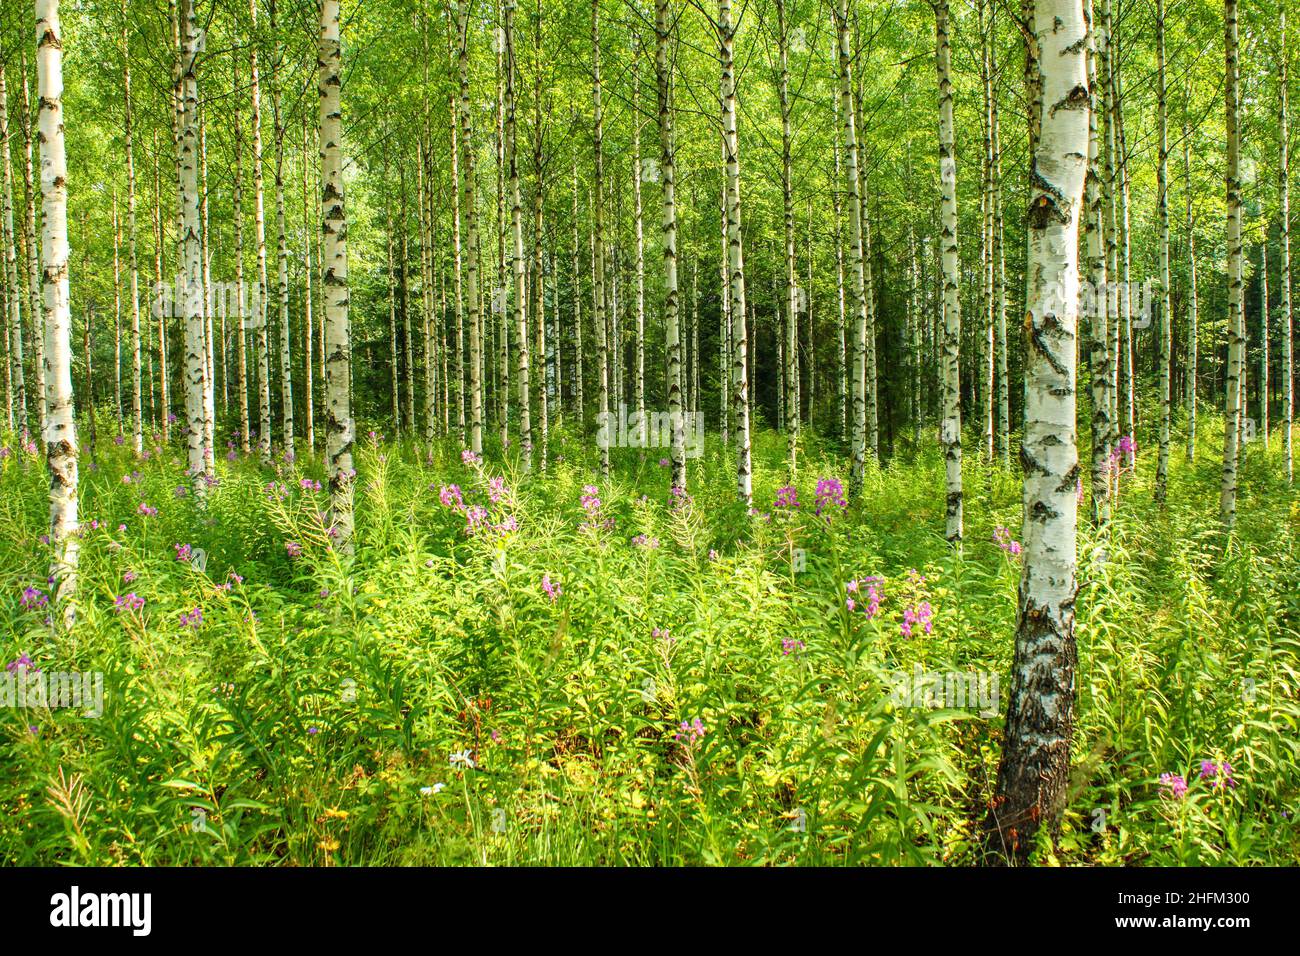 The beautiful nordic birch forest with fresh green grass and leaves. The detail of many black and white trunks during the sunny summer day. Stock Photo